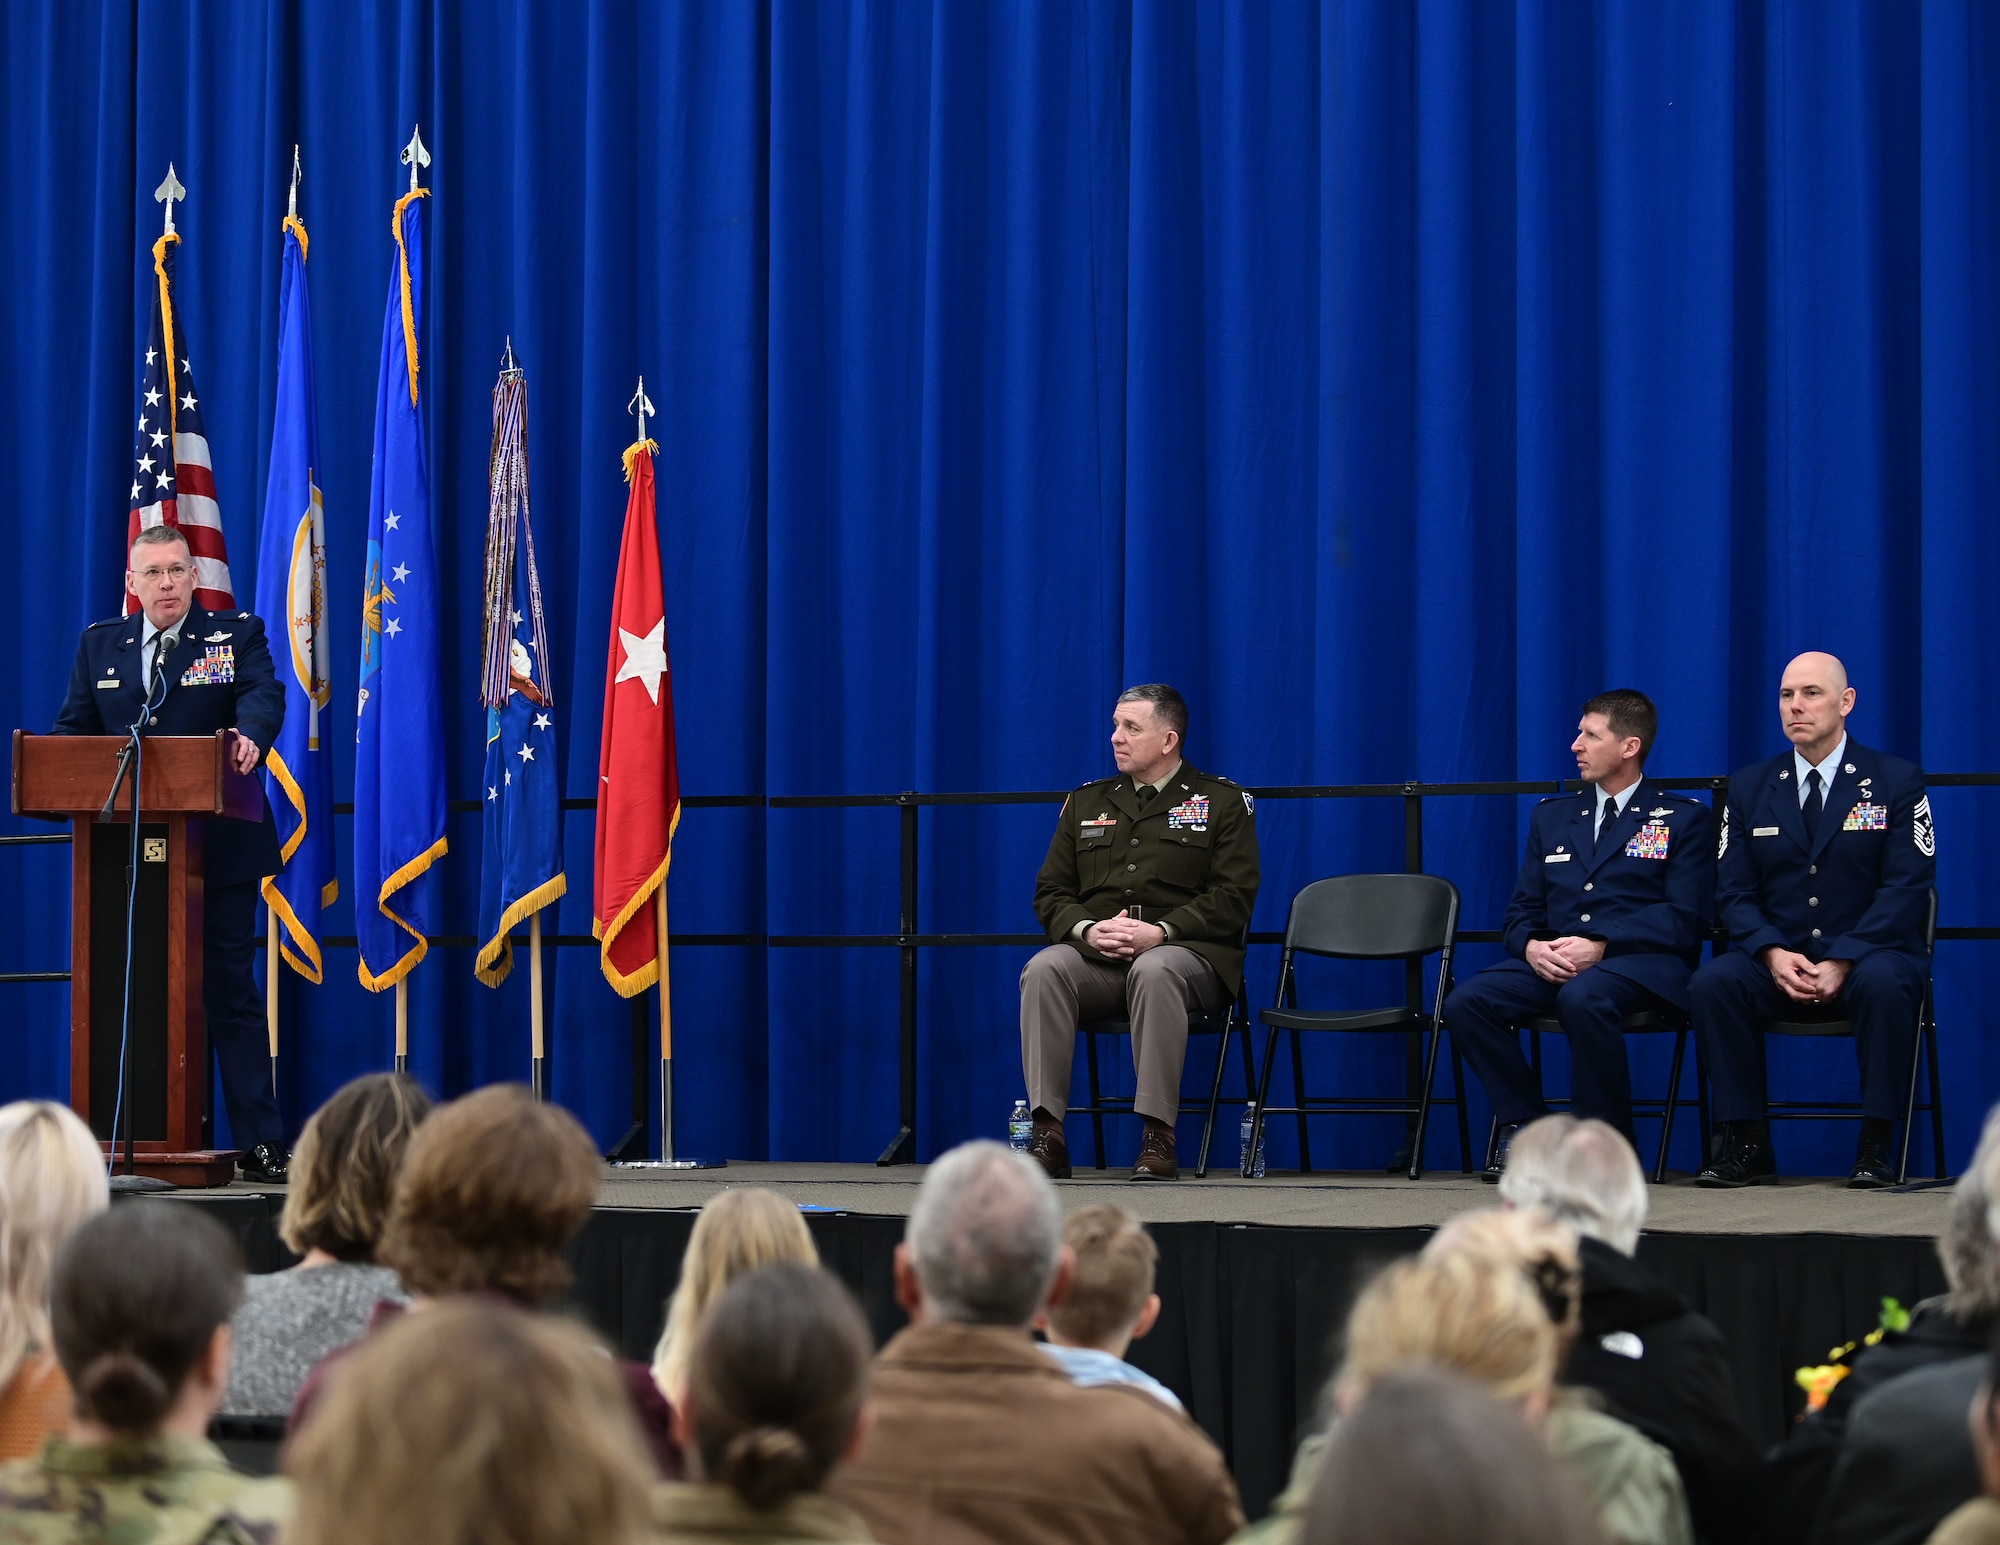 U.S. Air Force Col. James Cleet, 133rd Airlift Wing commander, speaks to Airmen, family, and friends before relinquishing command in St. Paul, Minn., March 4, 2023.